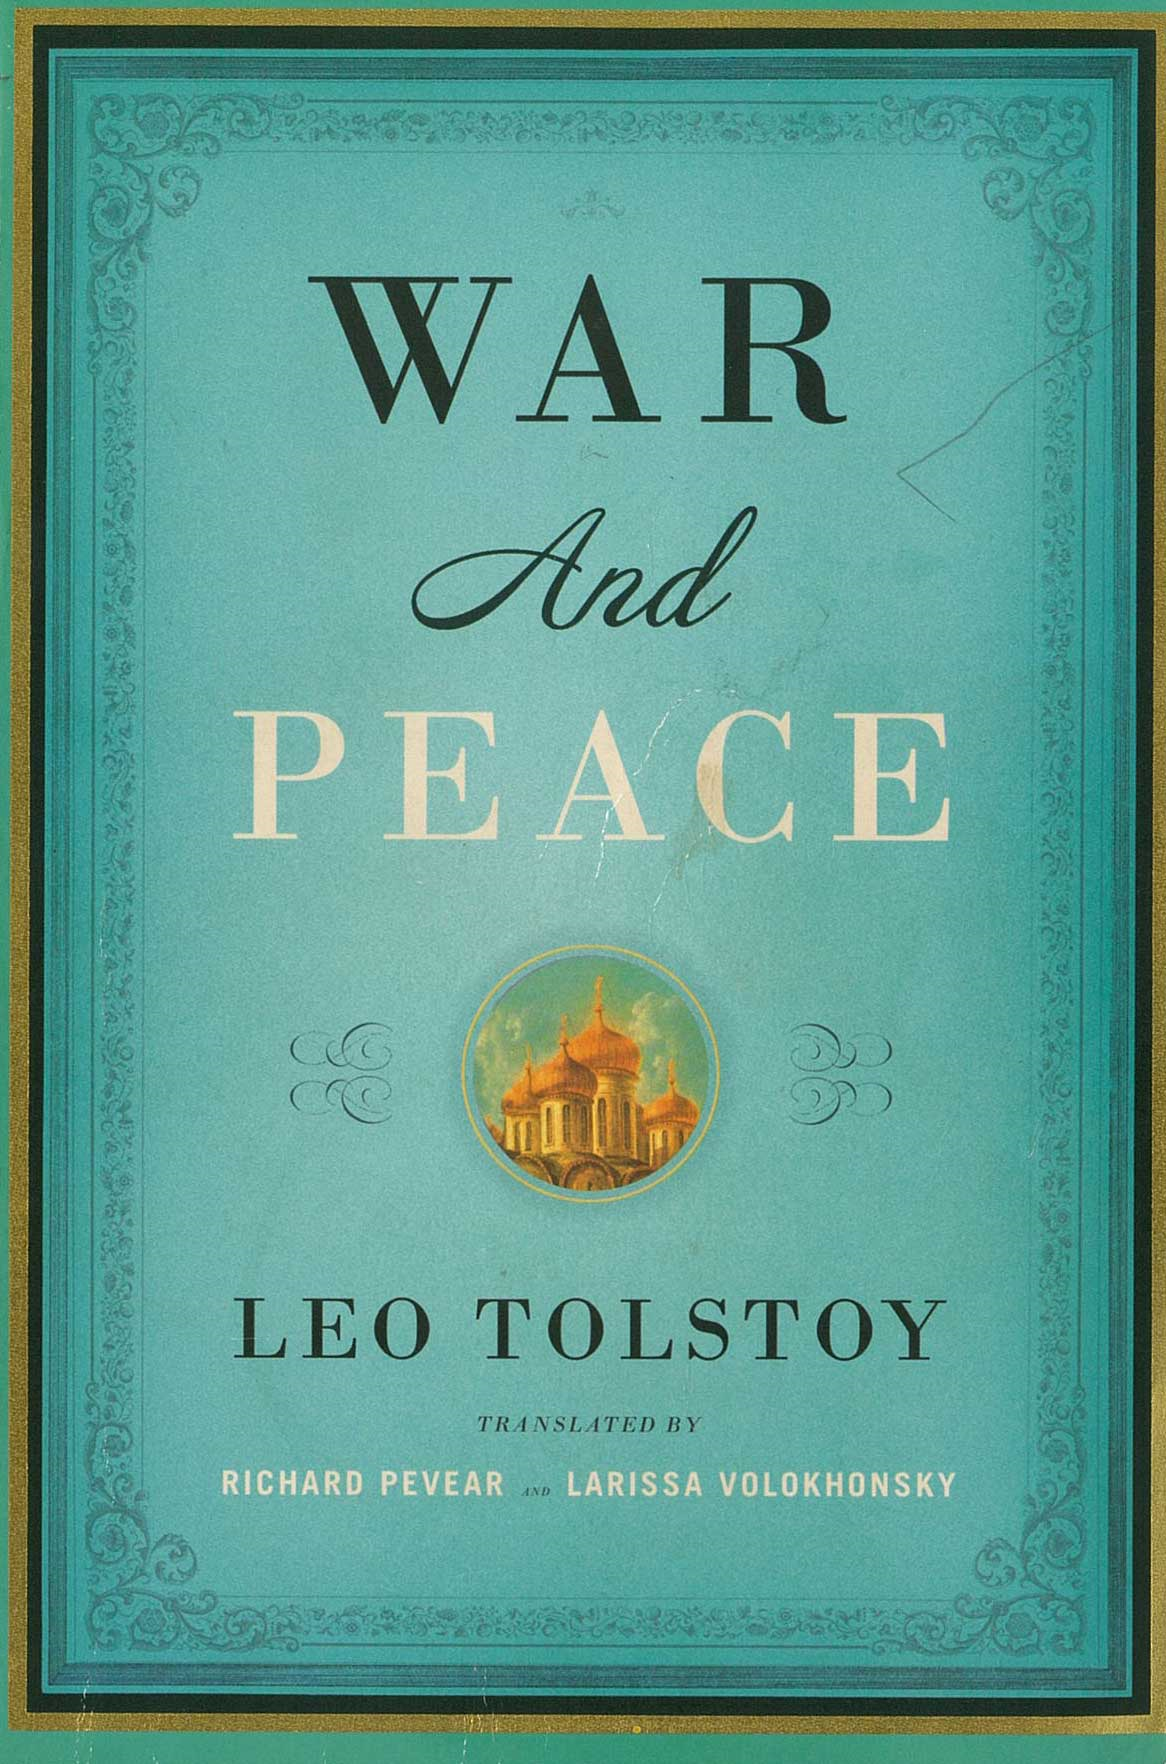 Review of the book "War and Peace" by Leo Tolstoy - Easy To Read: Book  Reviews